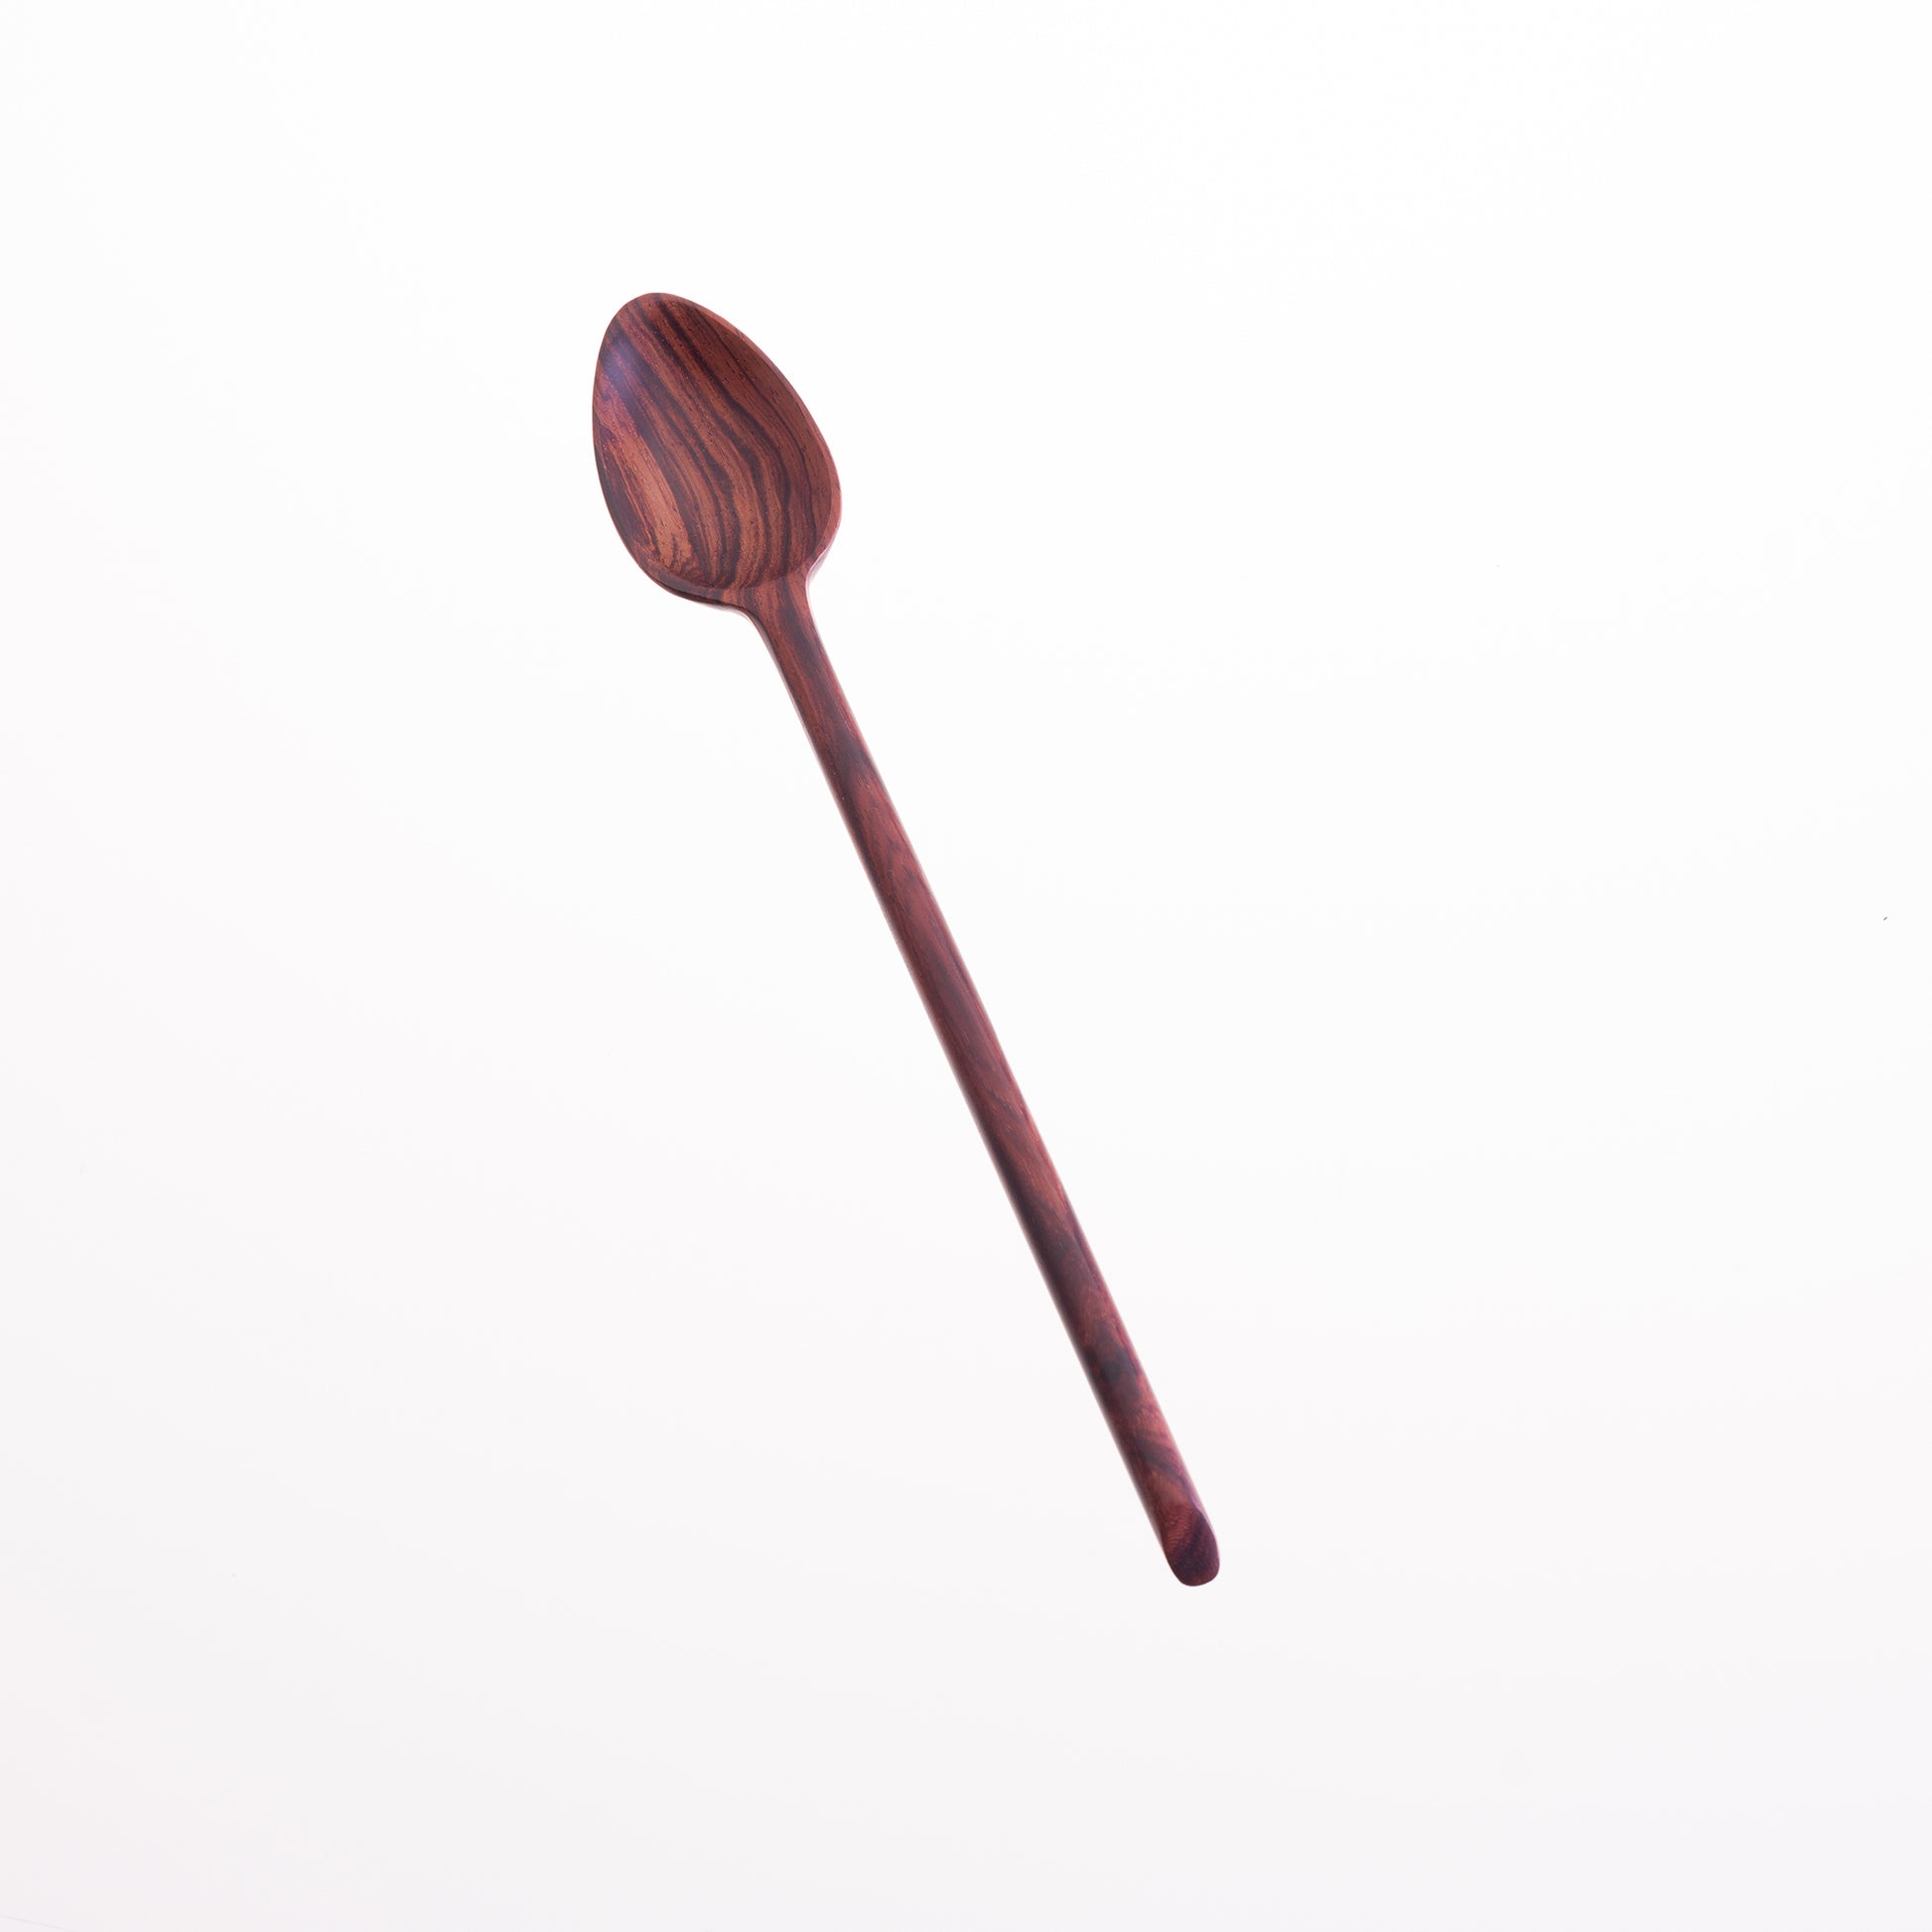 Long handled jam spoon made from rosewood